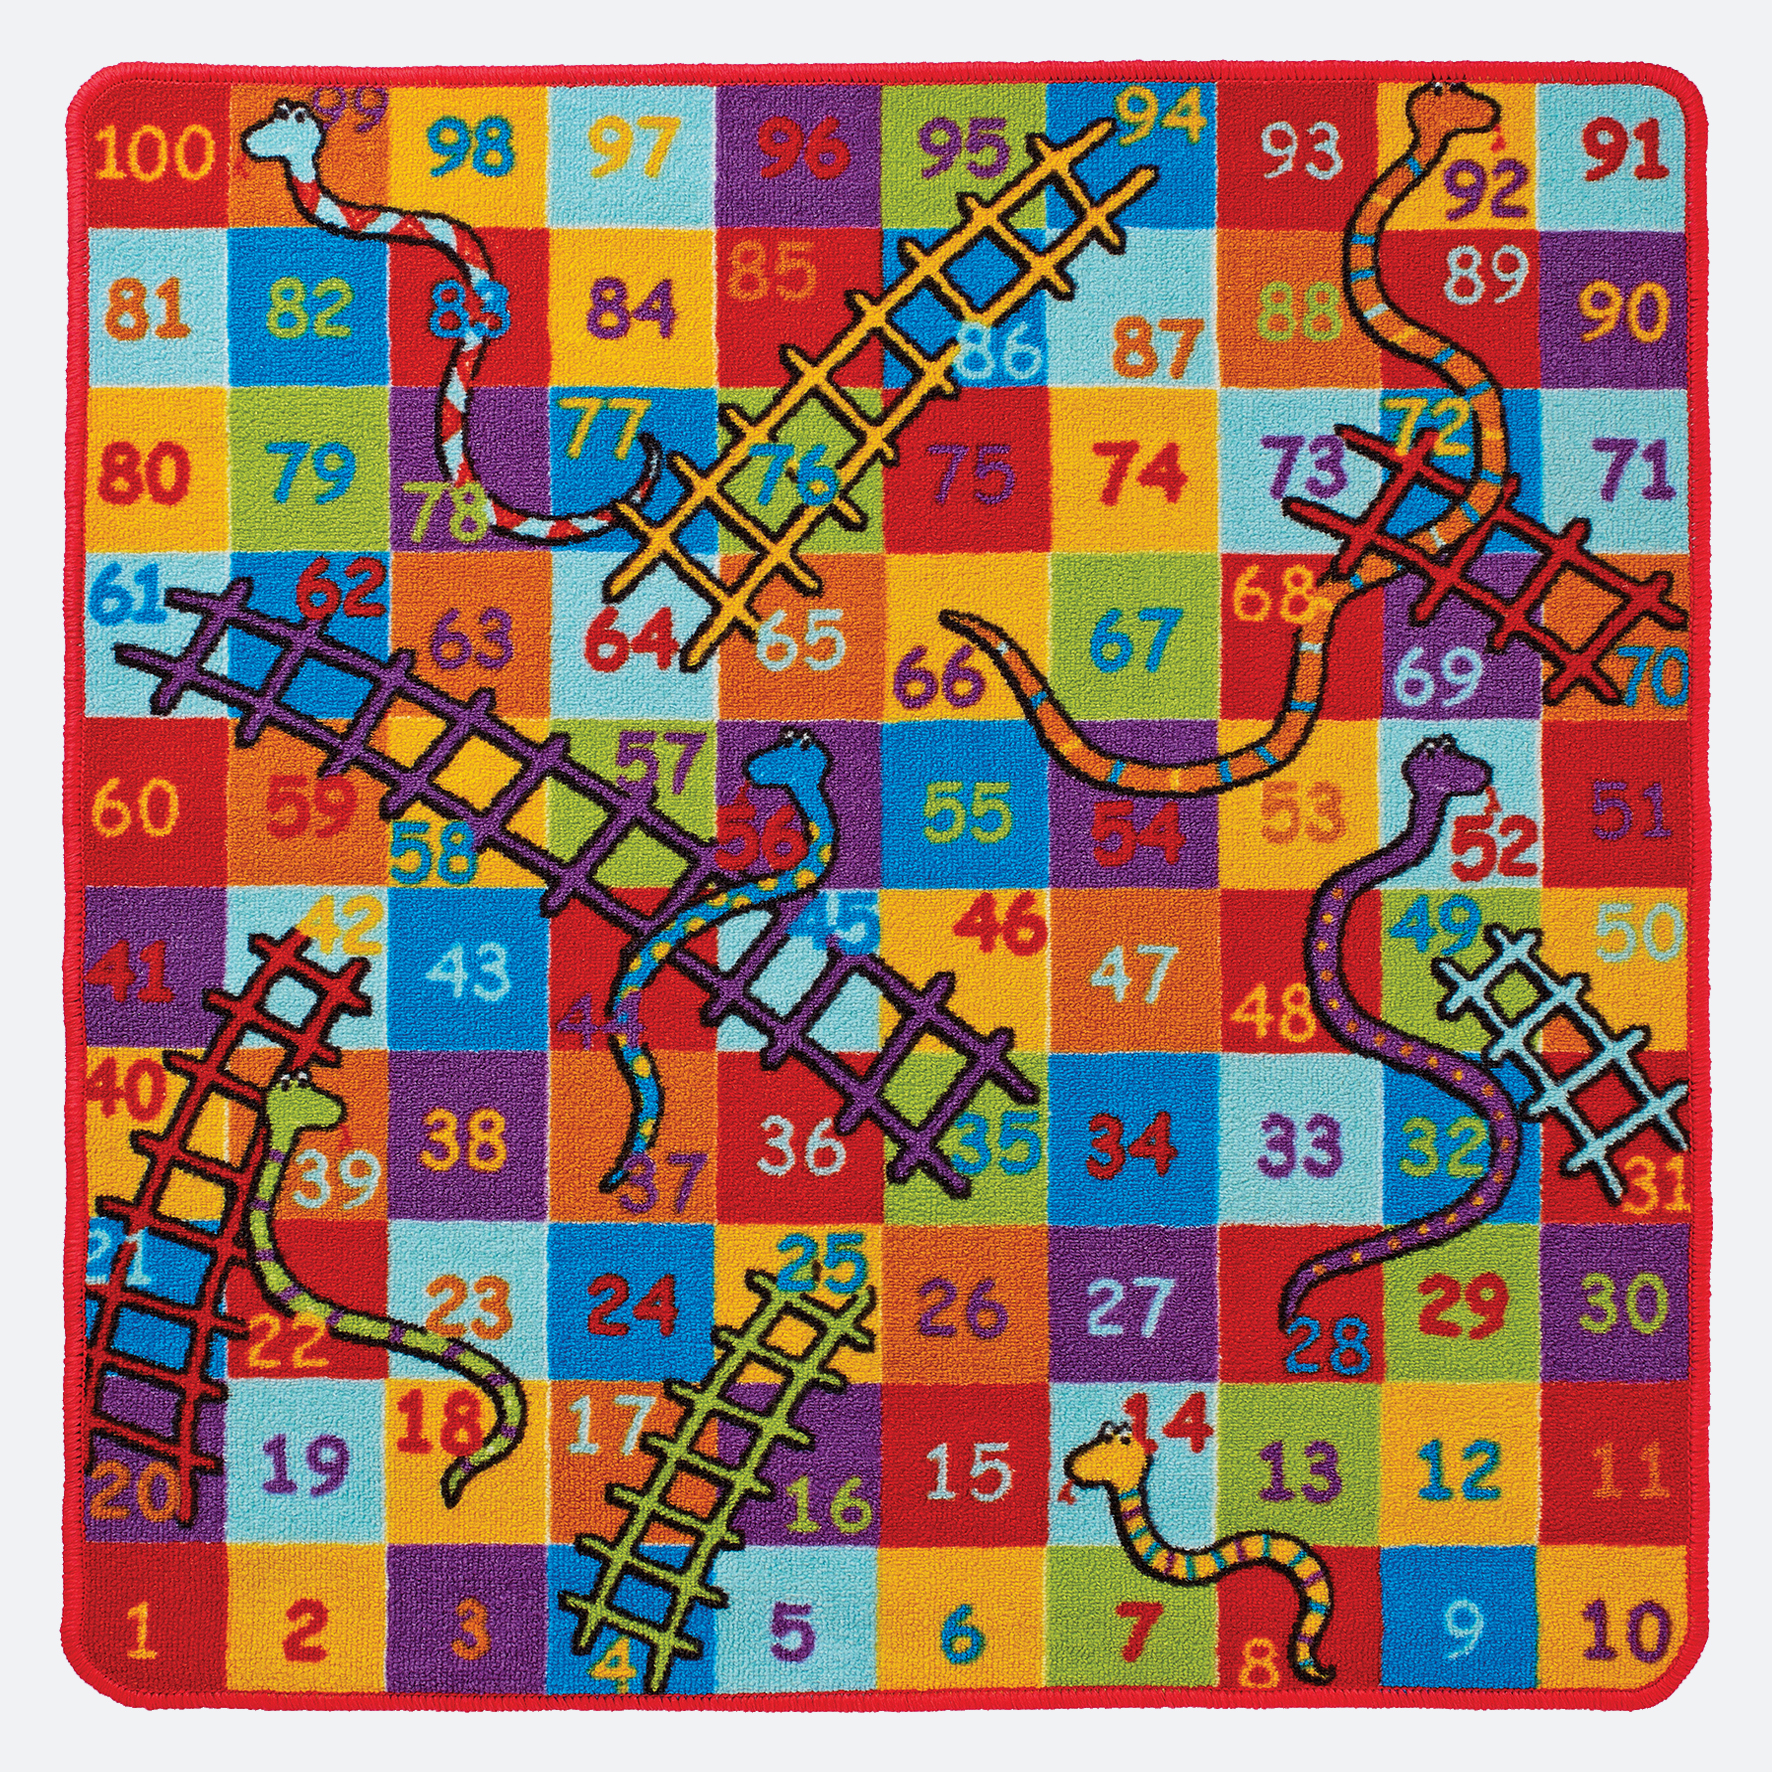 Playtime-Snakes-Ladders